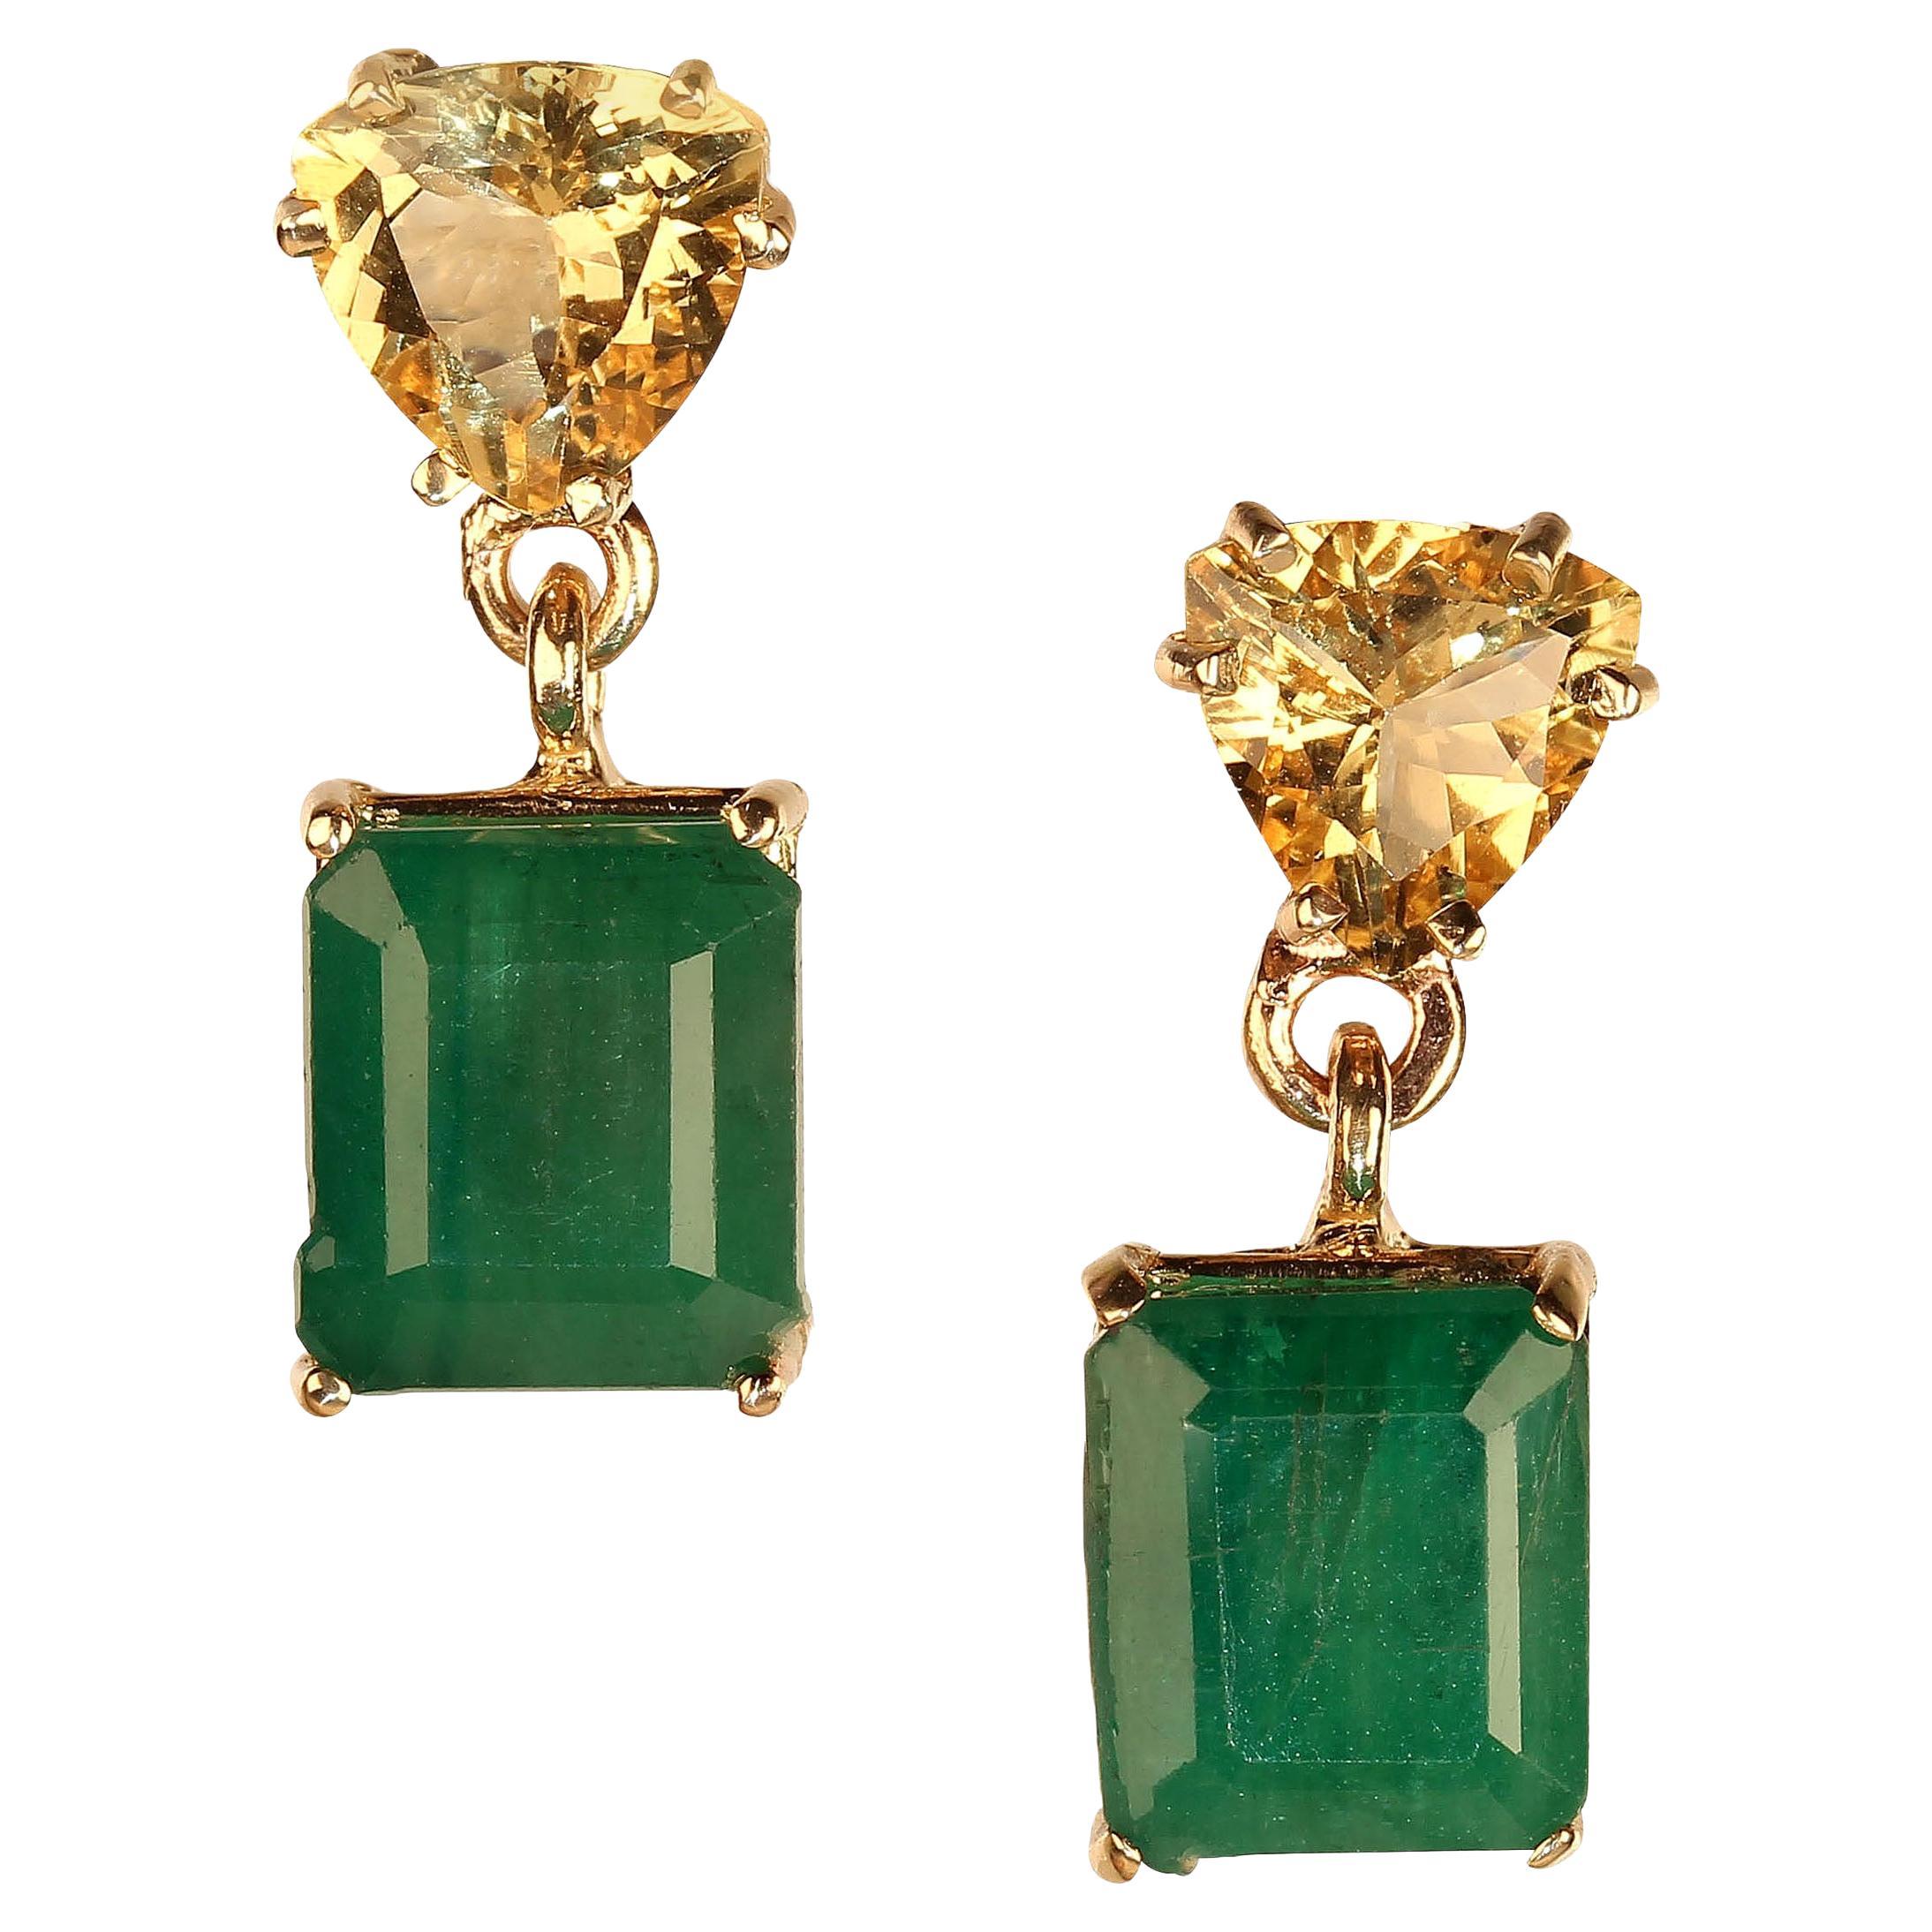 AJD Bold Emerald and Golden Beryl Dangle Earrings in 14K Yellow Gold